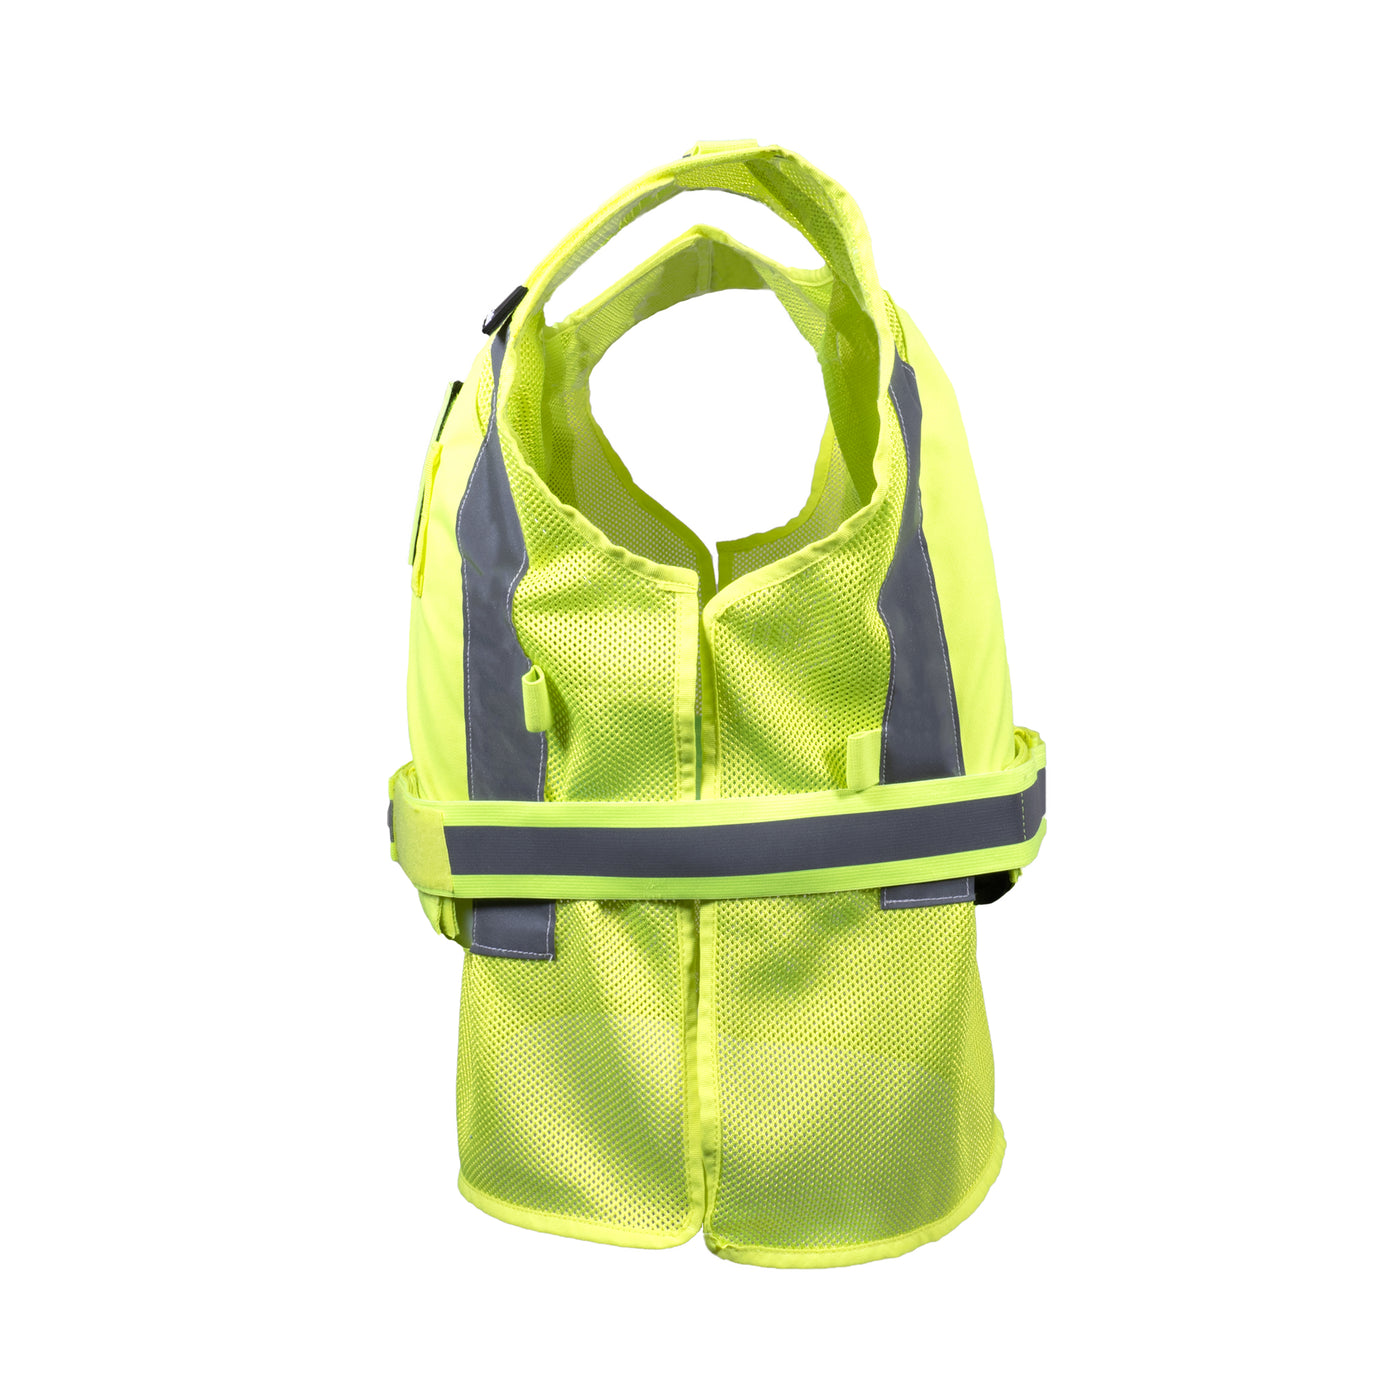 Shield Safety Vest, Reflective Vest, Fluorescent Yellow, 3X-Large, 25 Pack  